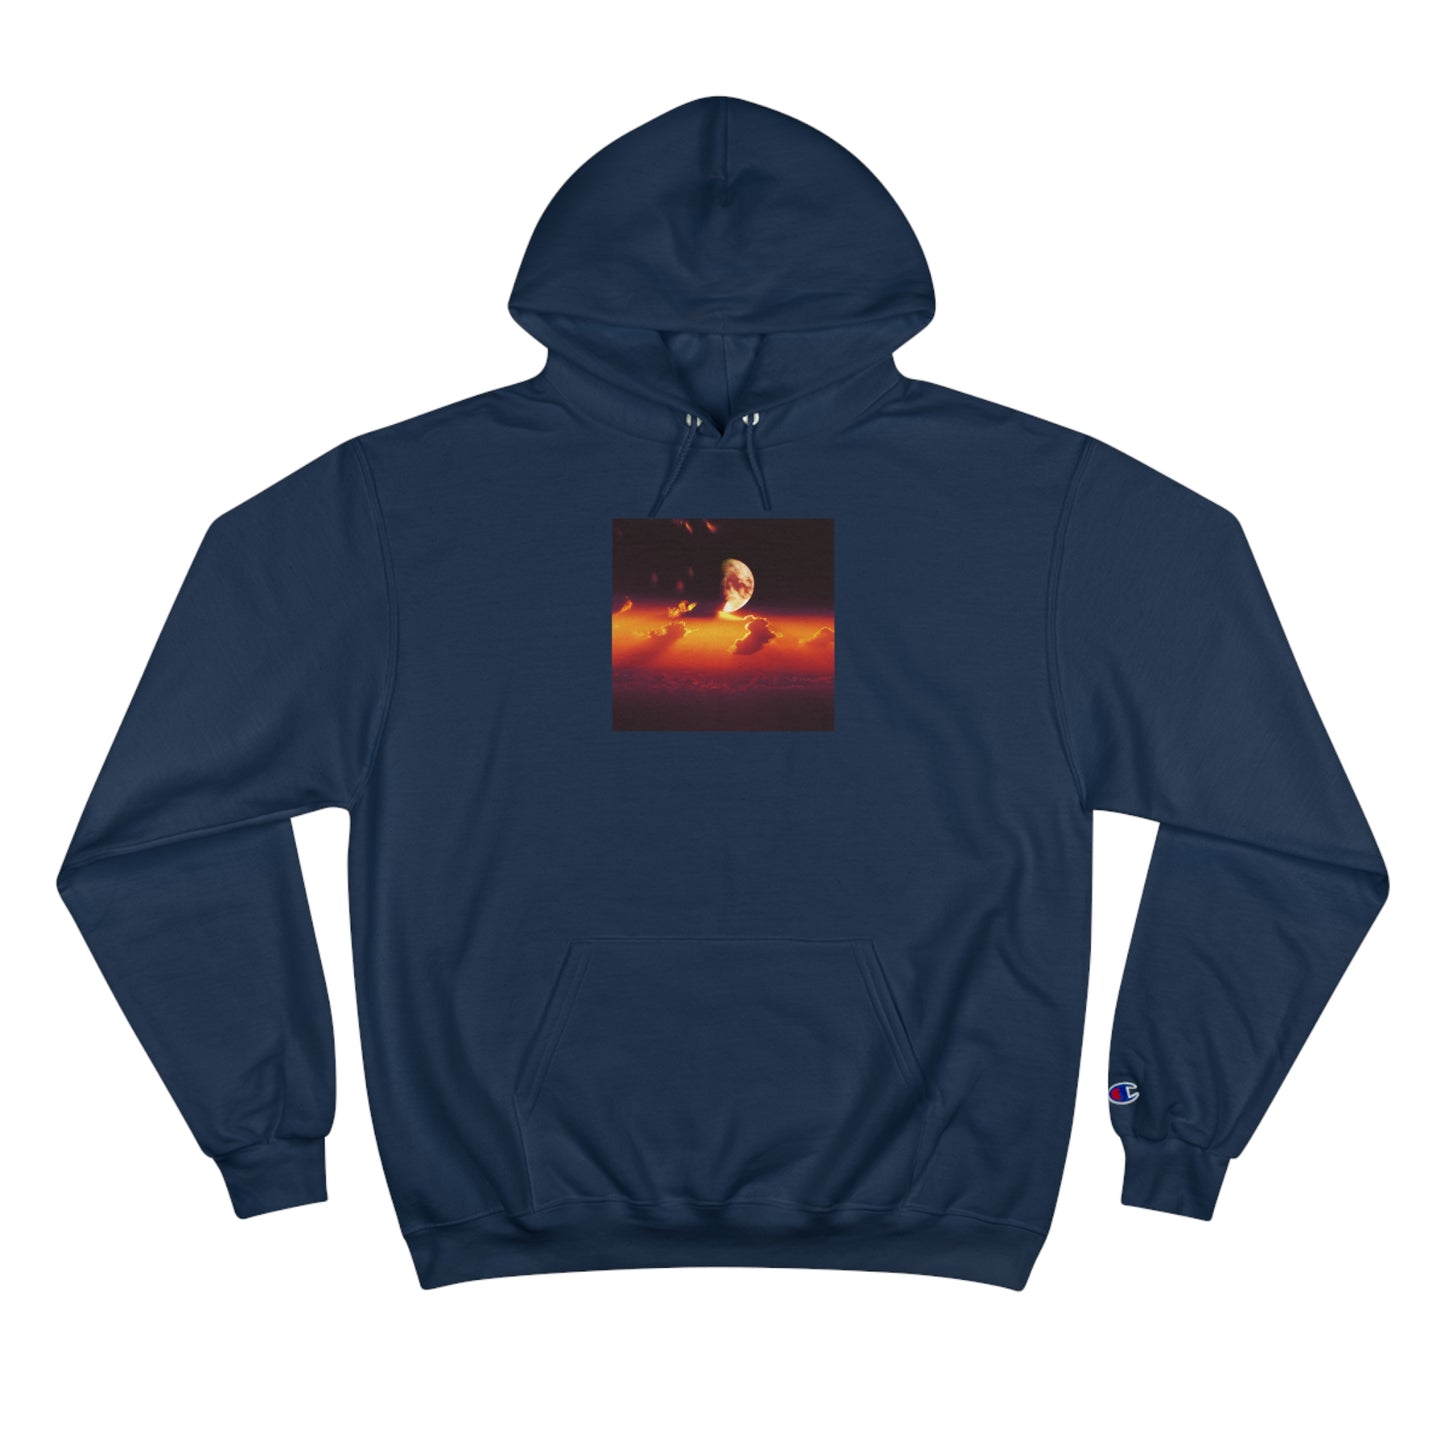 Tarthiel - Angel of Strength and Protection - Hoodie